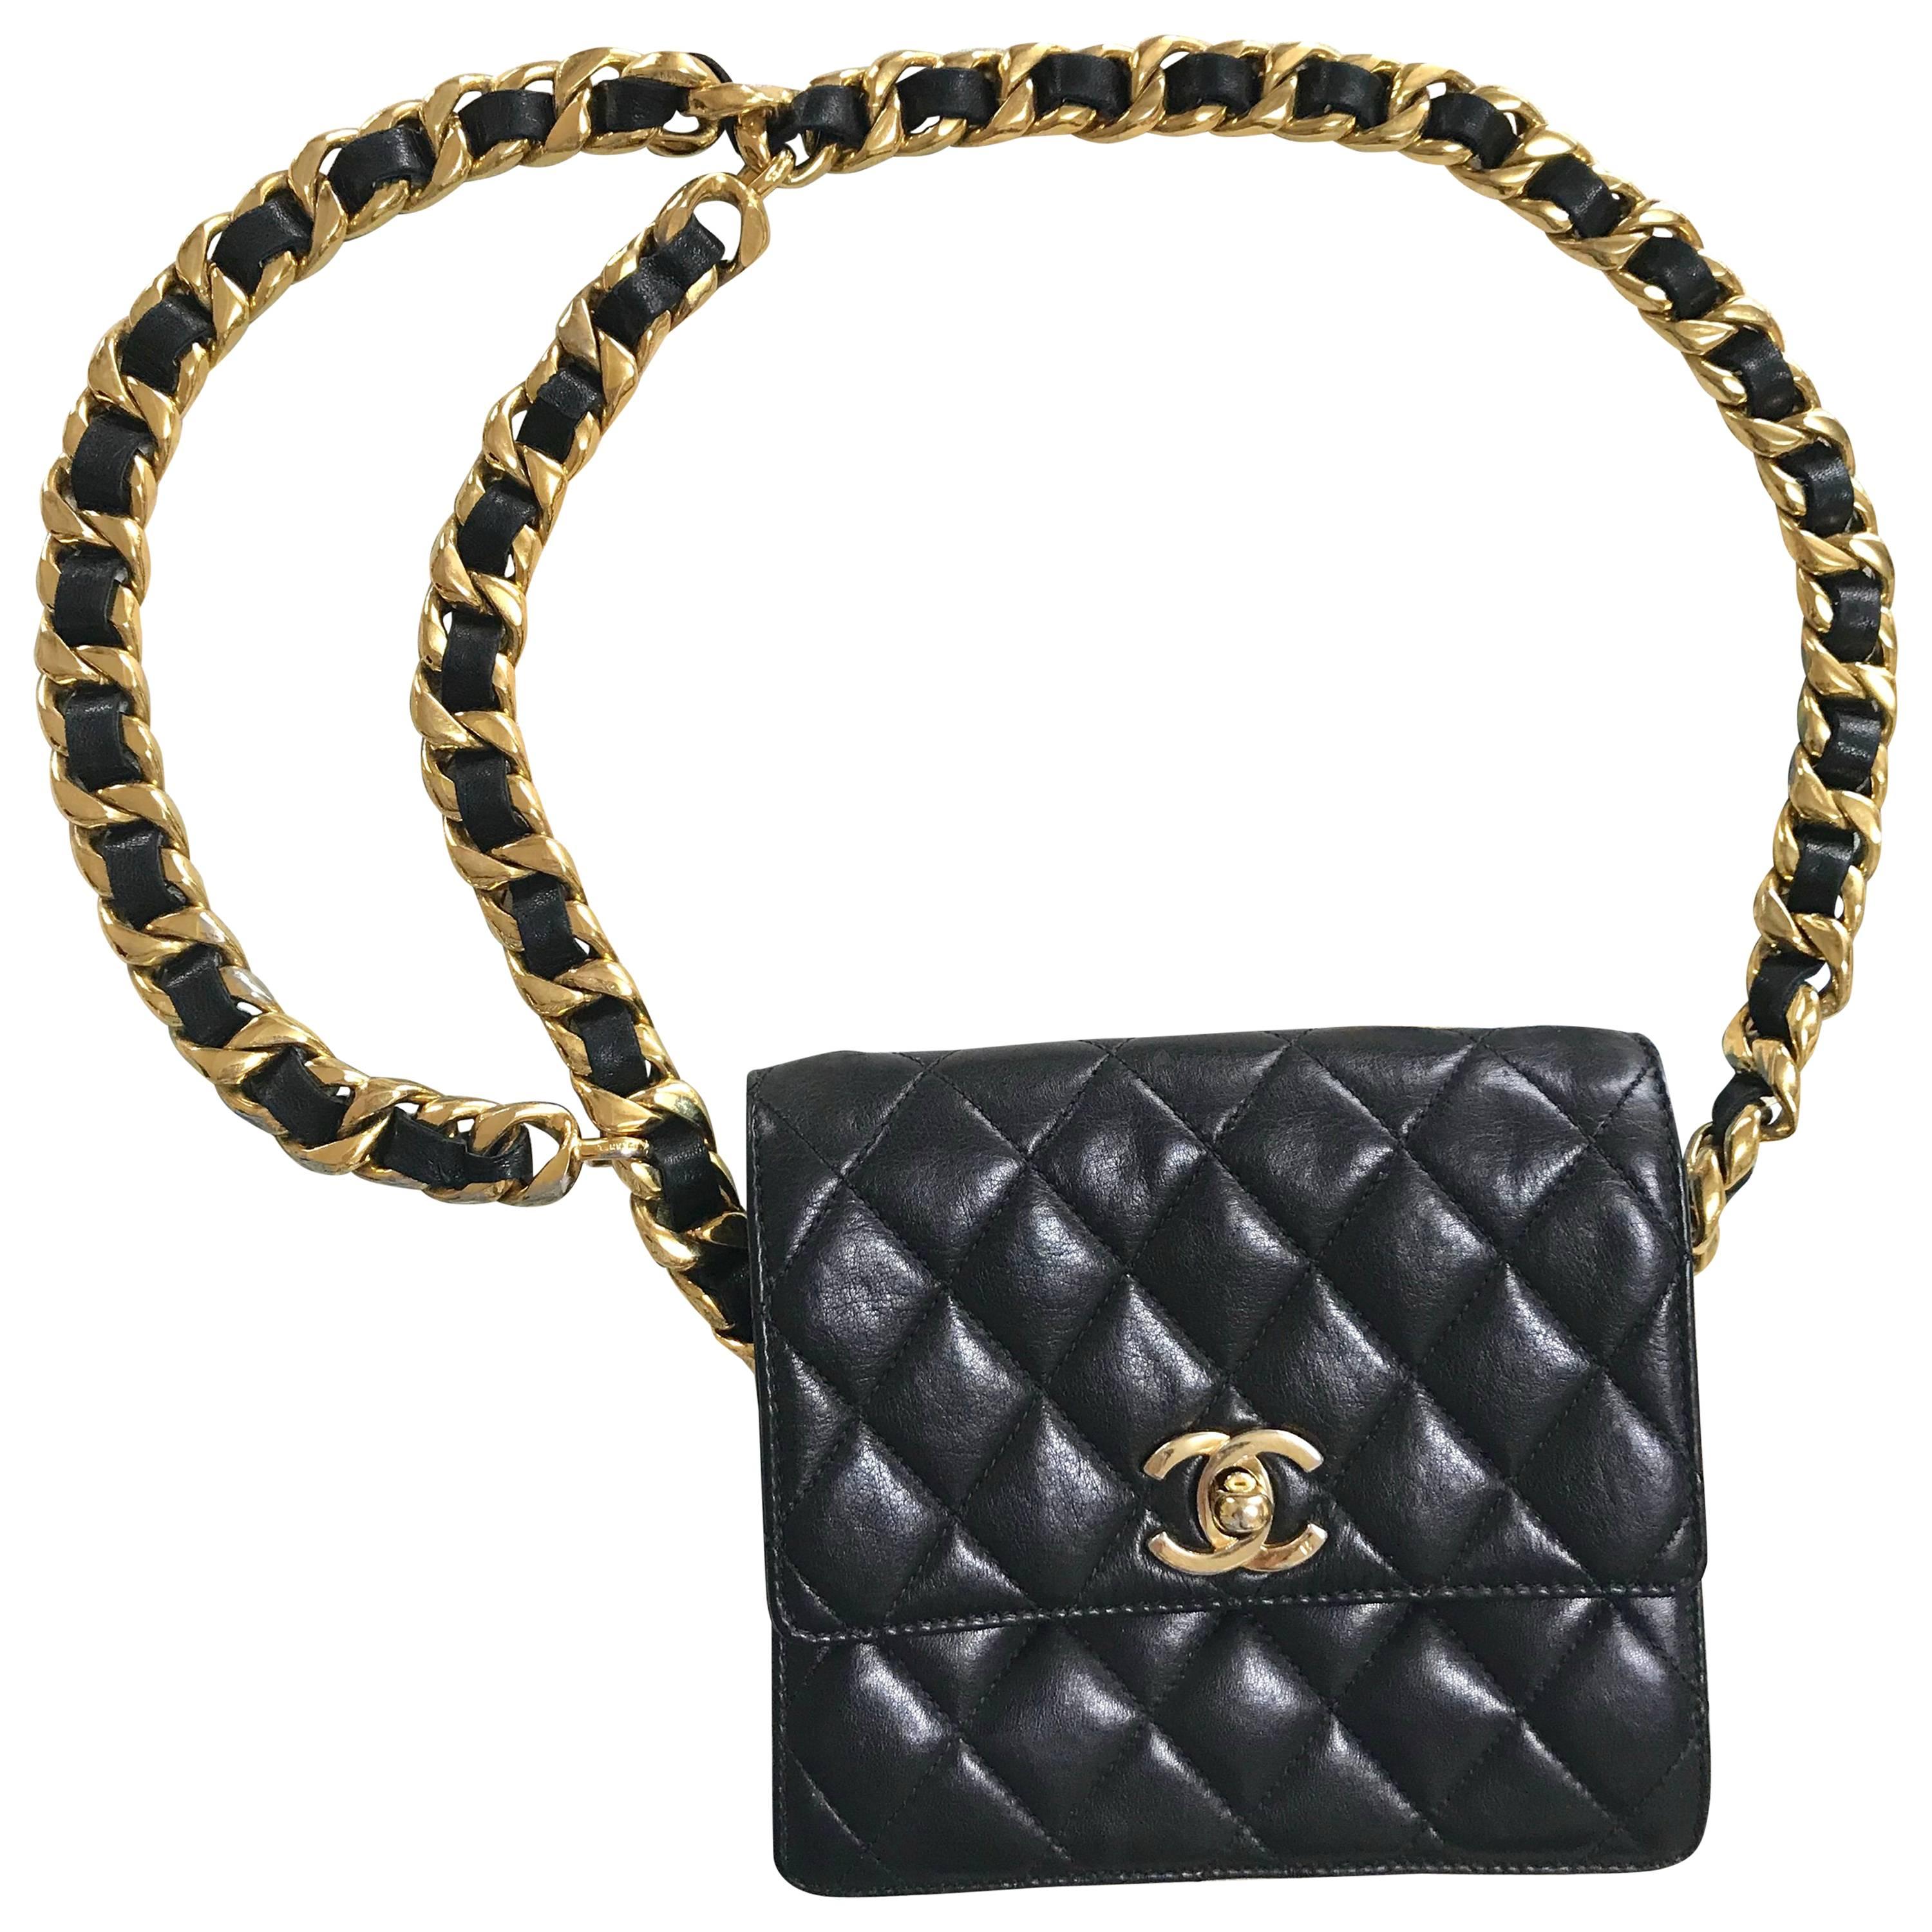 Chanel Vintage square 2.55 black fanny pack / pouch bag with thick chain belt 